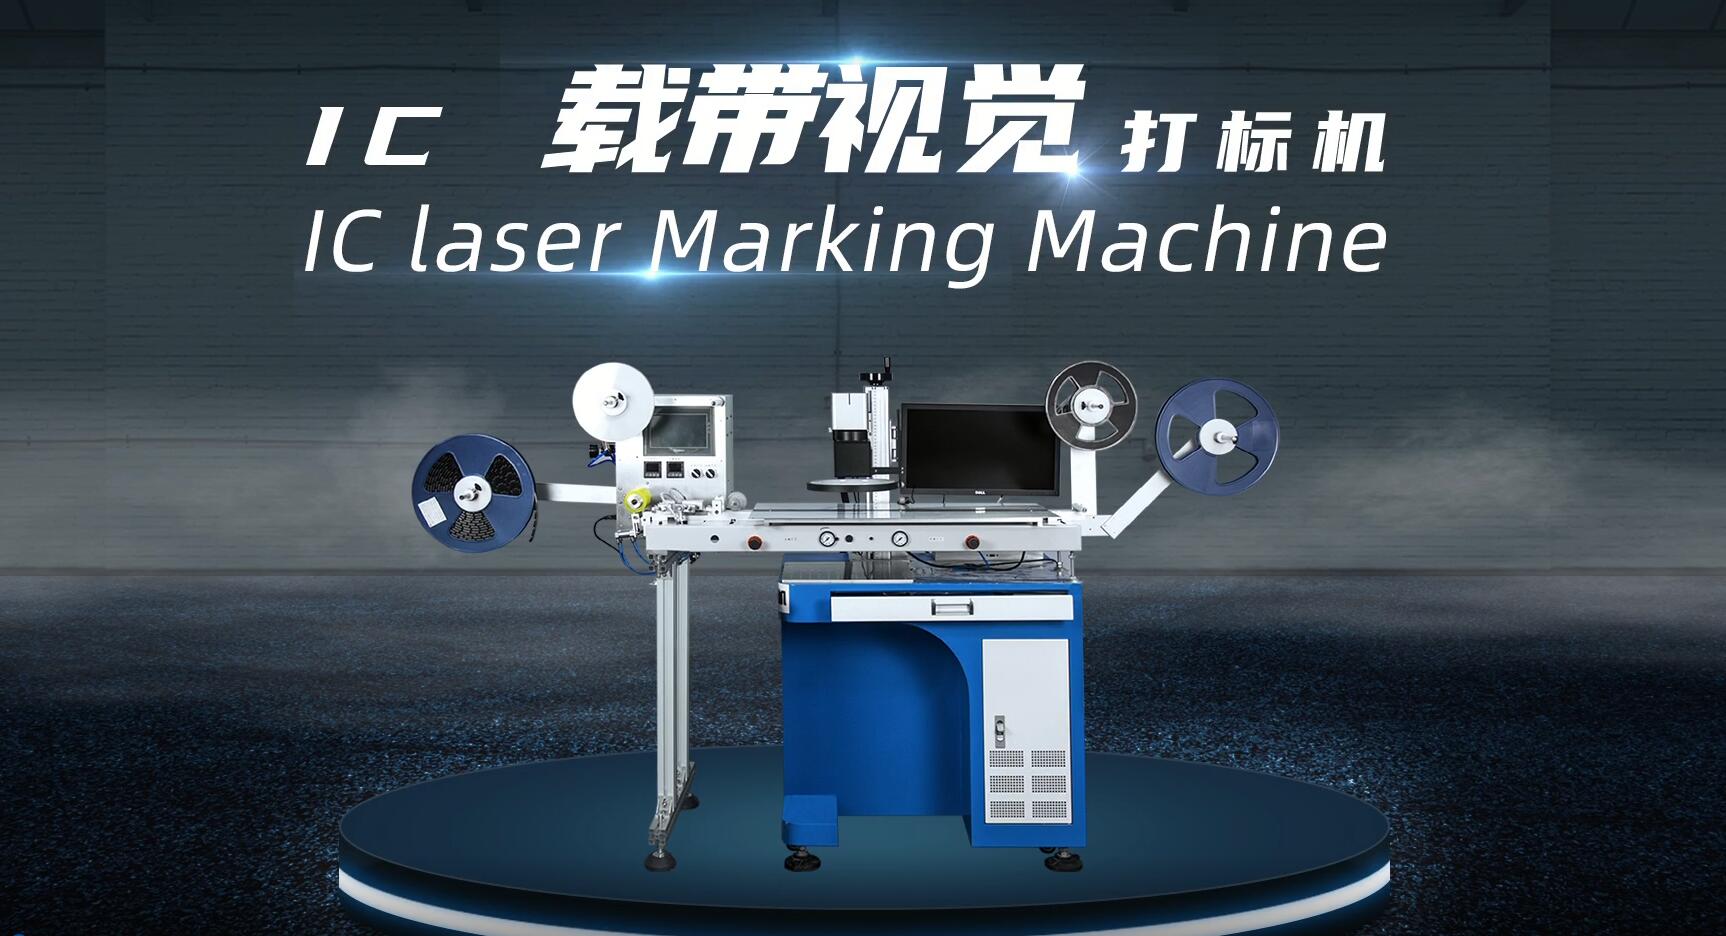 Application of laser in chip industry